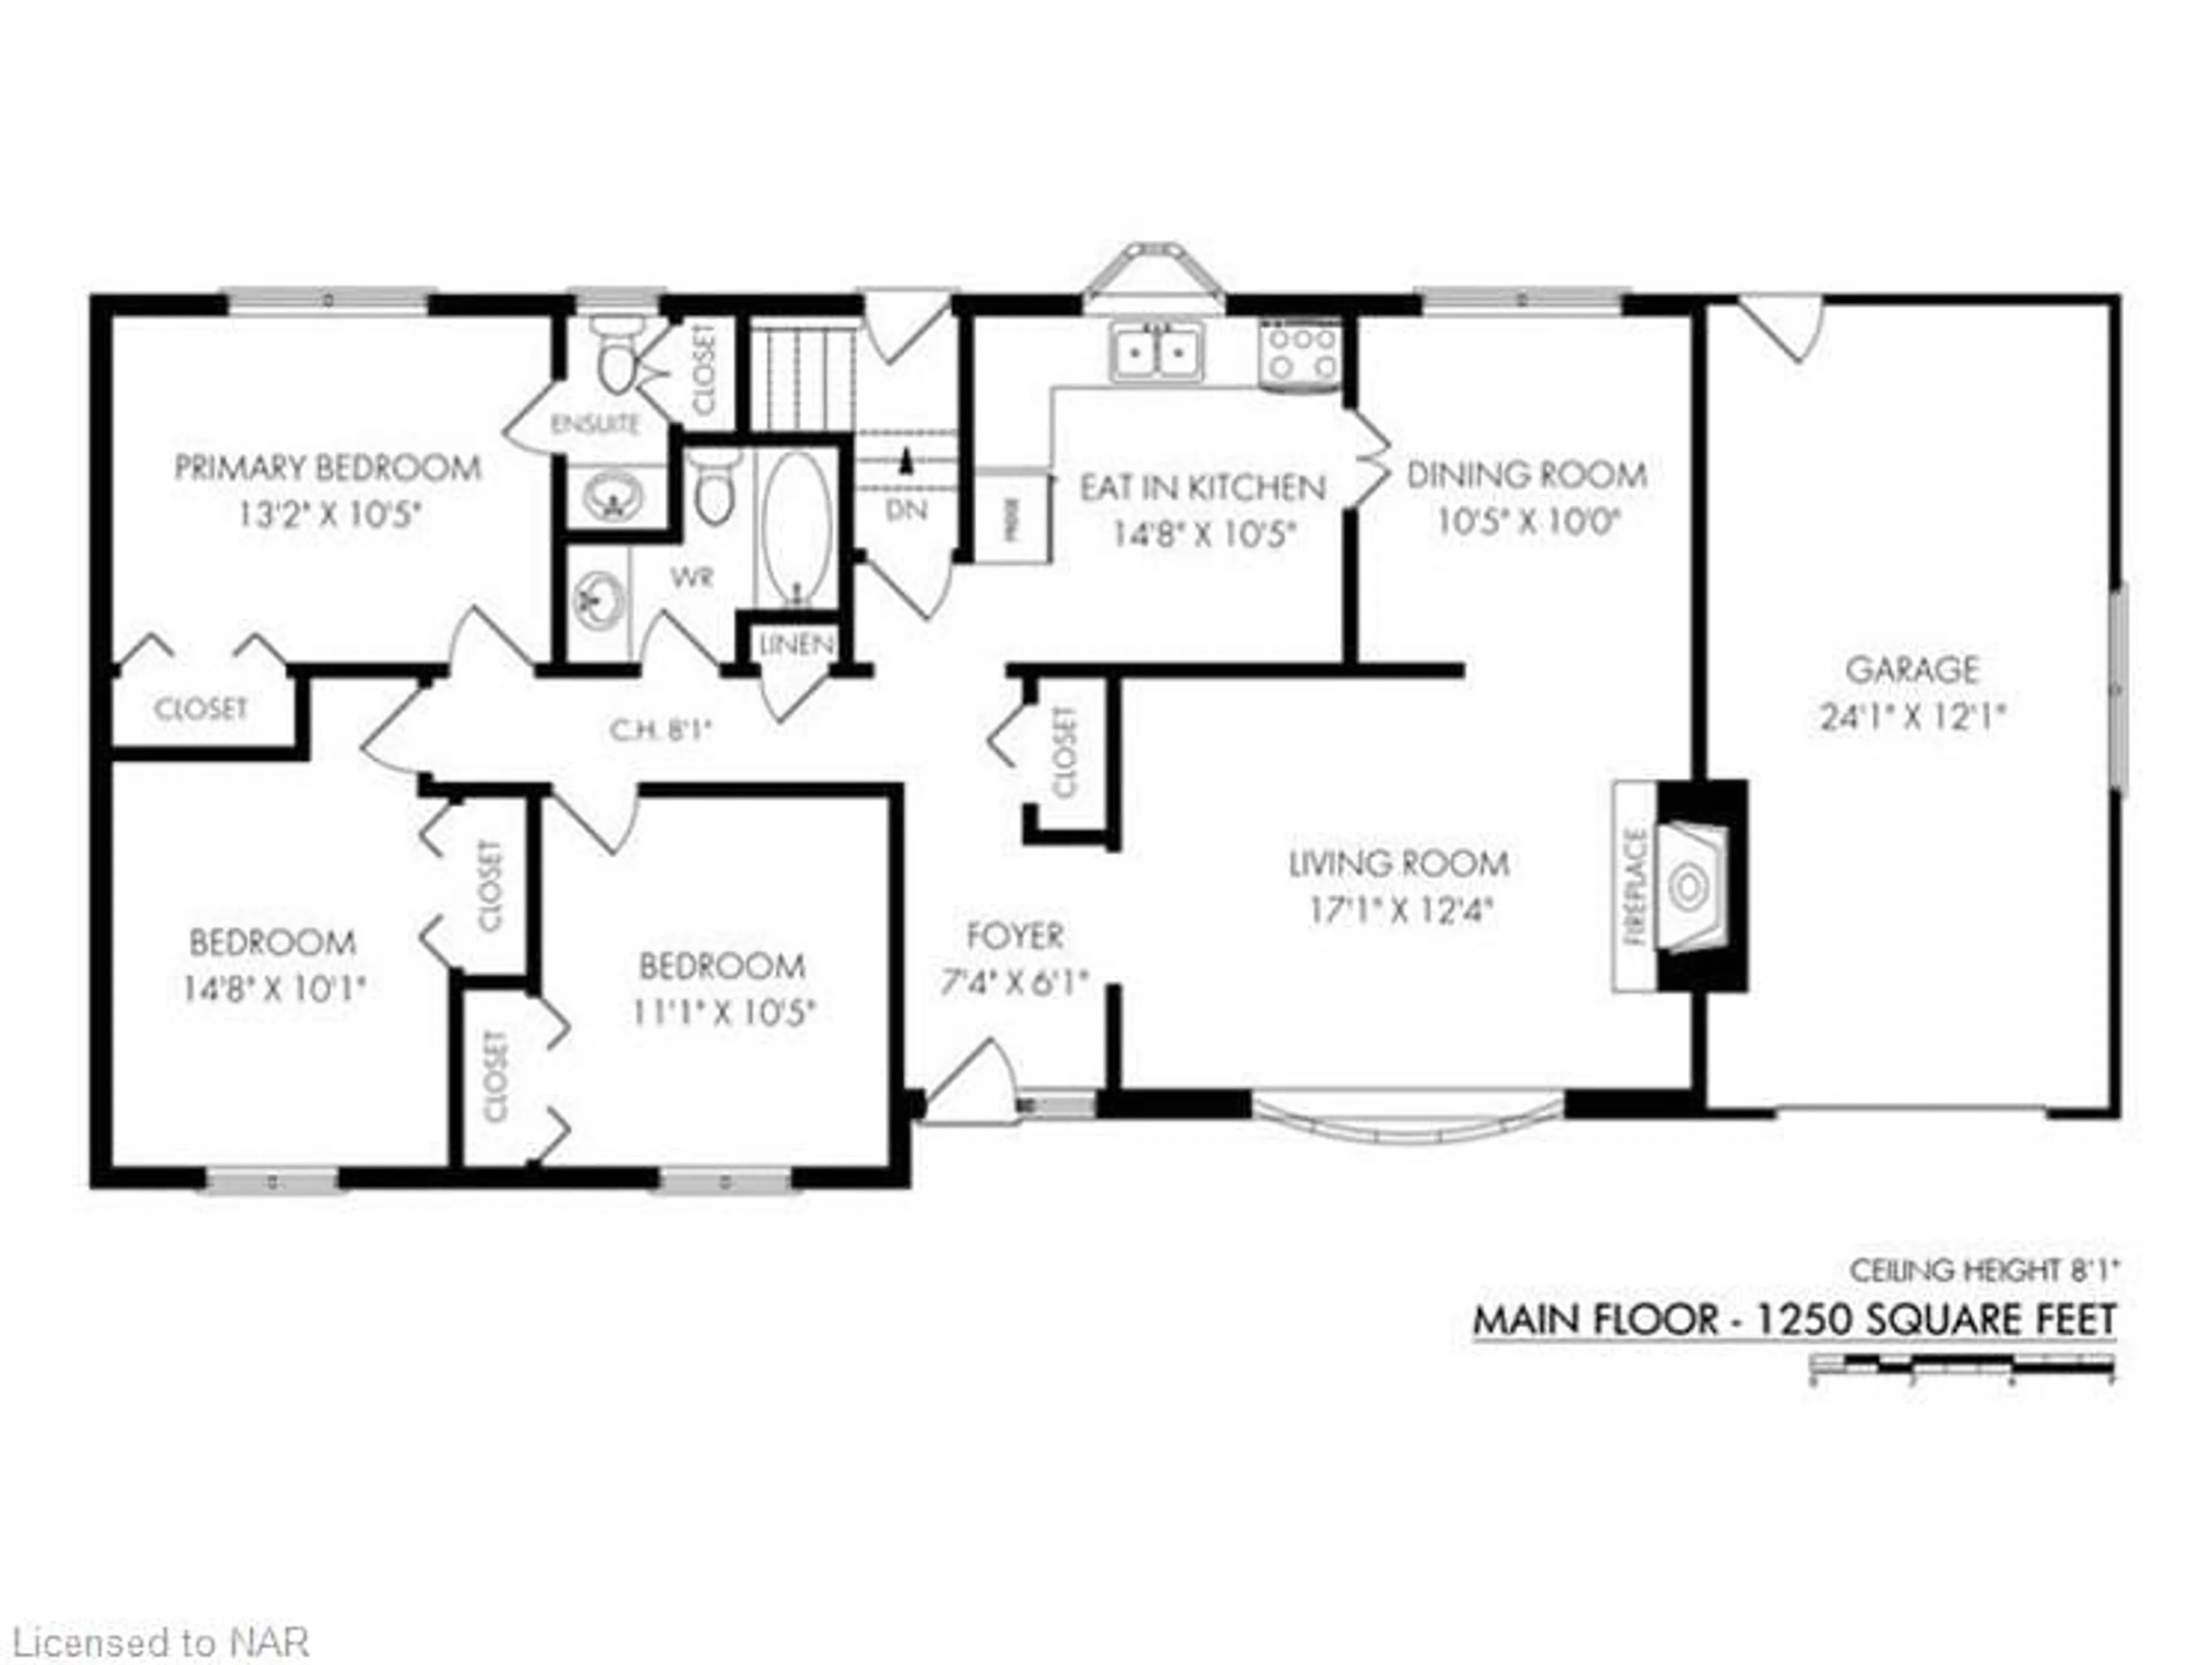 Floor plan for 90 Dorchester Rd, Grimsby Ontario L3M 1A8